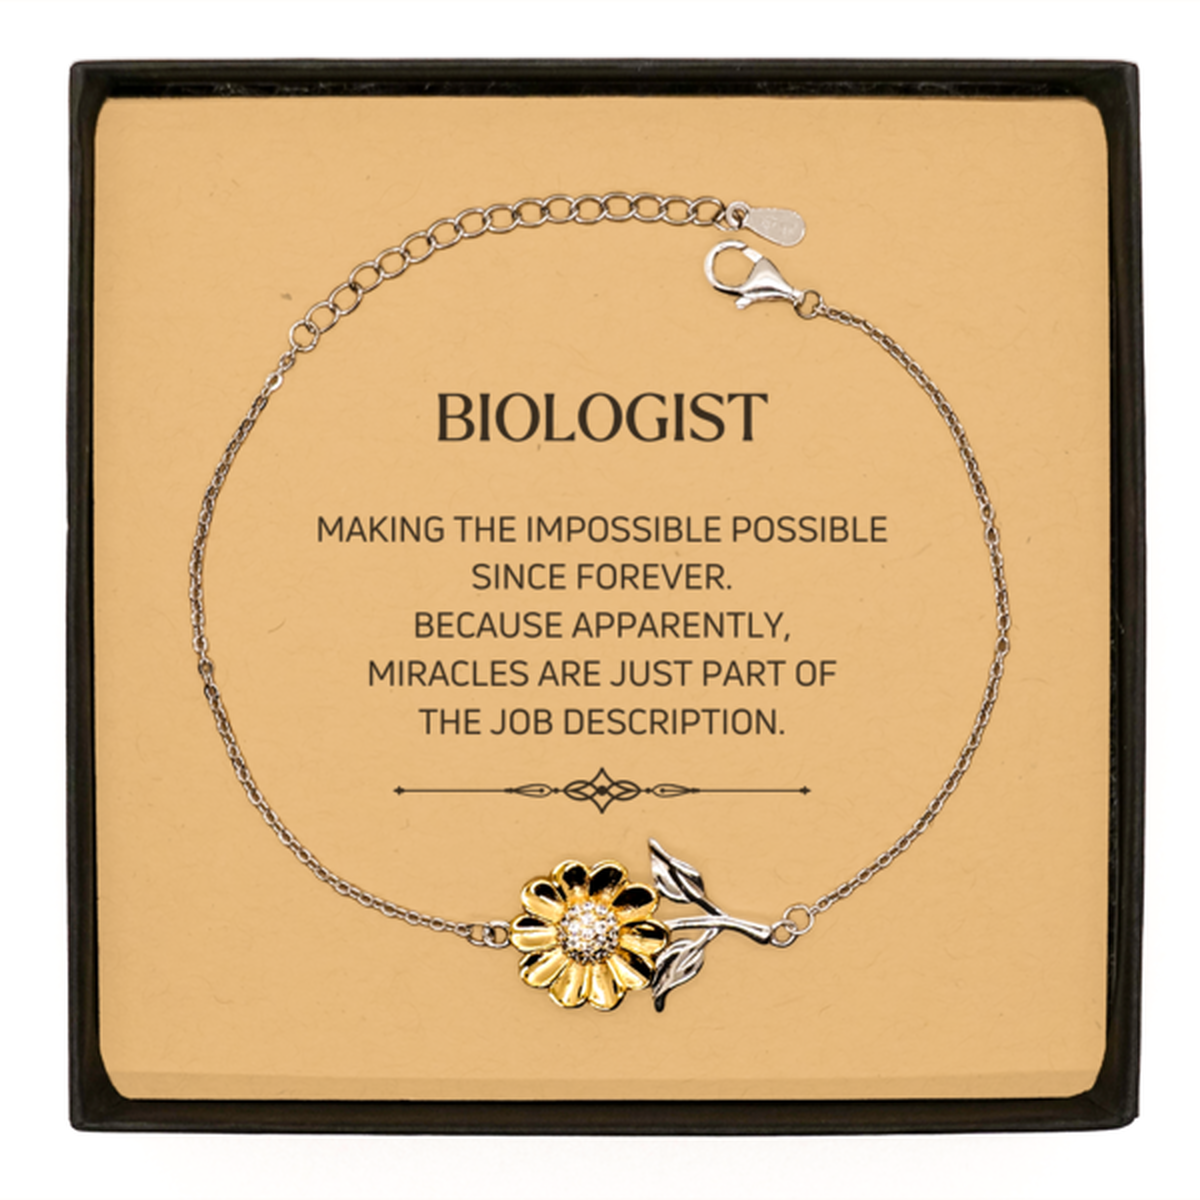 Funny Biologist Gifts, Miracles are just part of the job description, Inspirational Birthday Sunflower Bracelet For Biologist, Men, Women, Coworkers, Friends, Boss